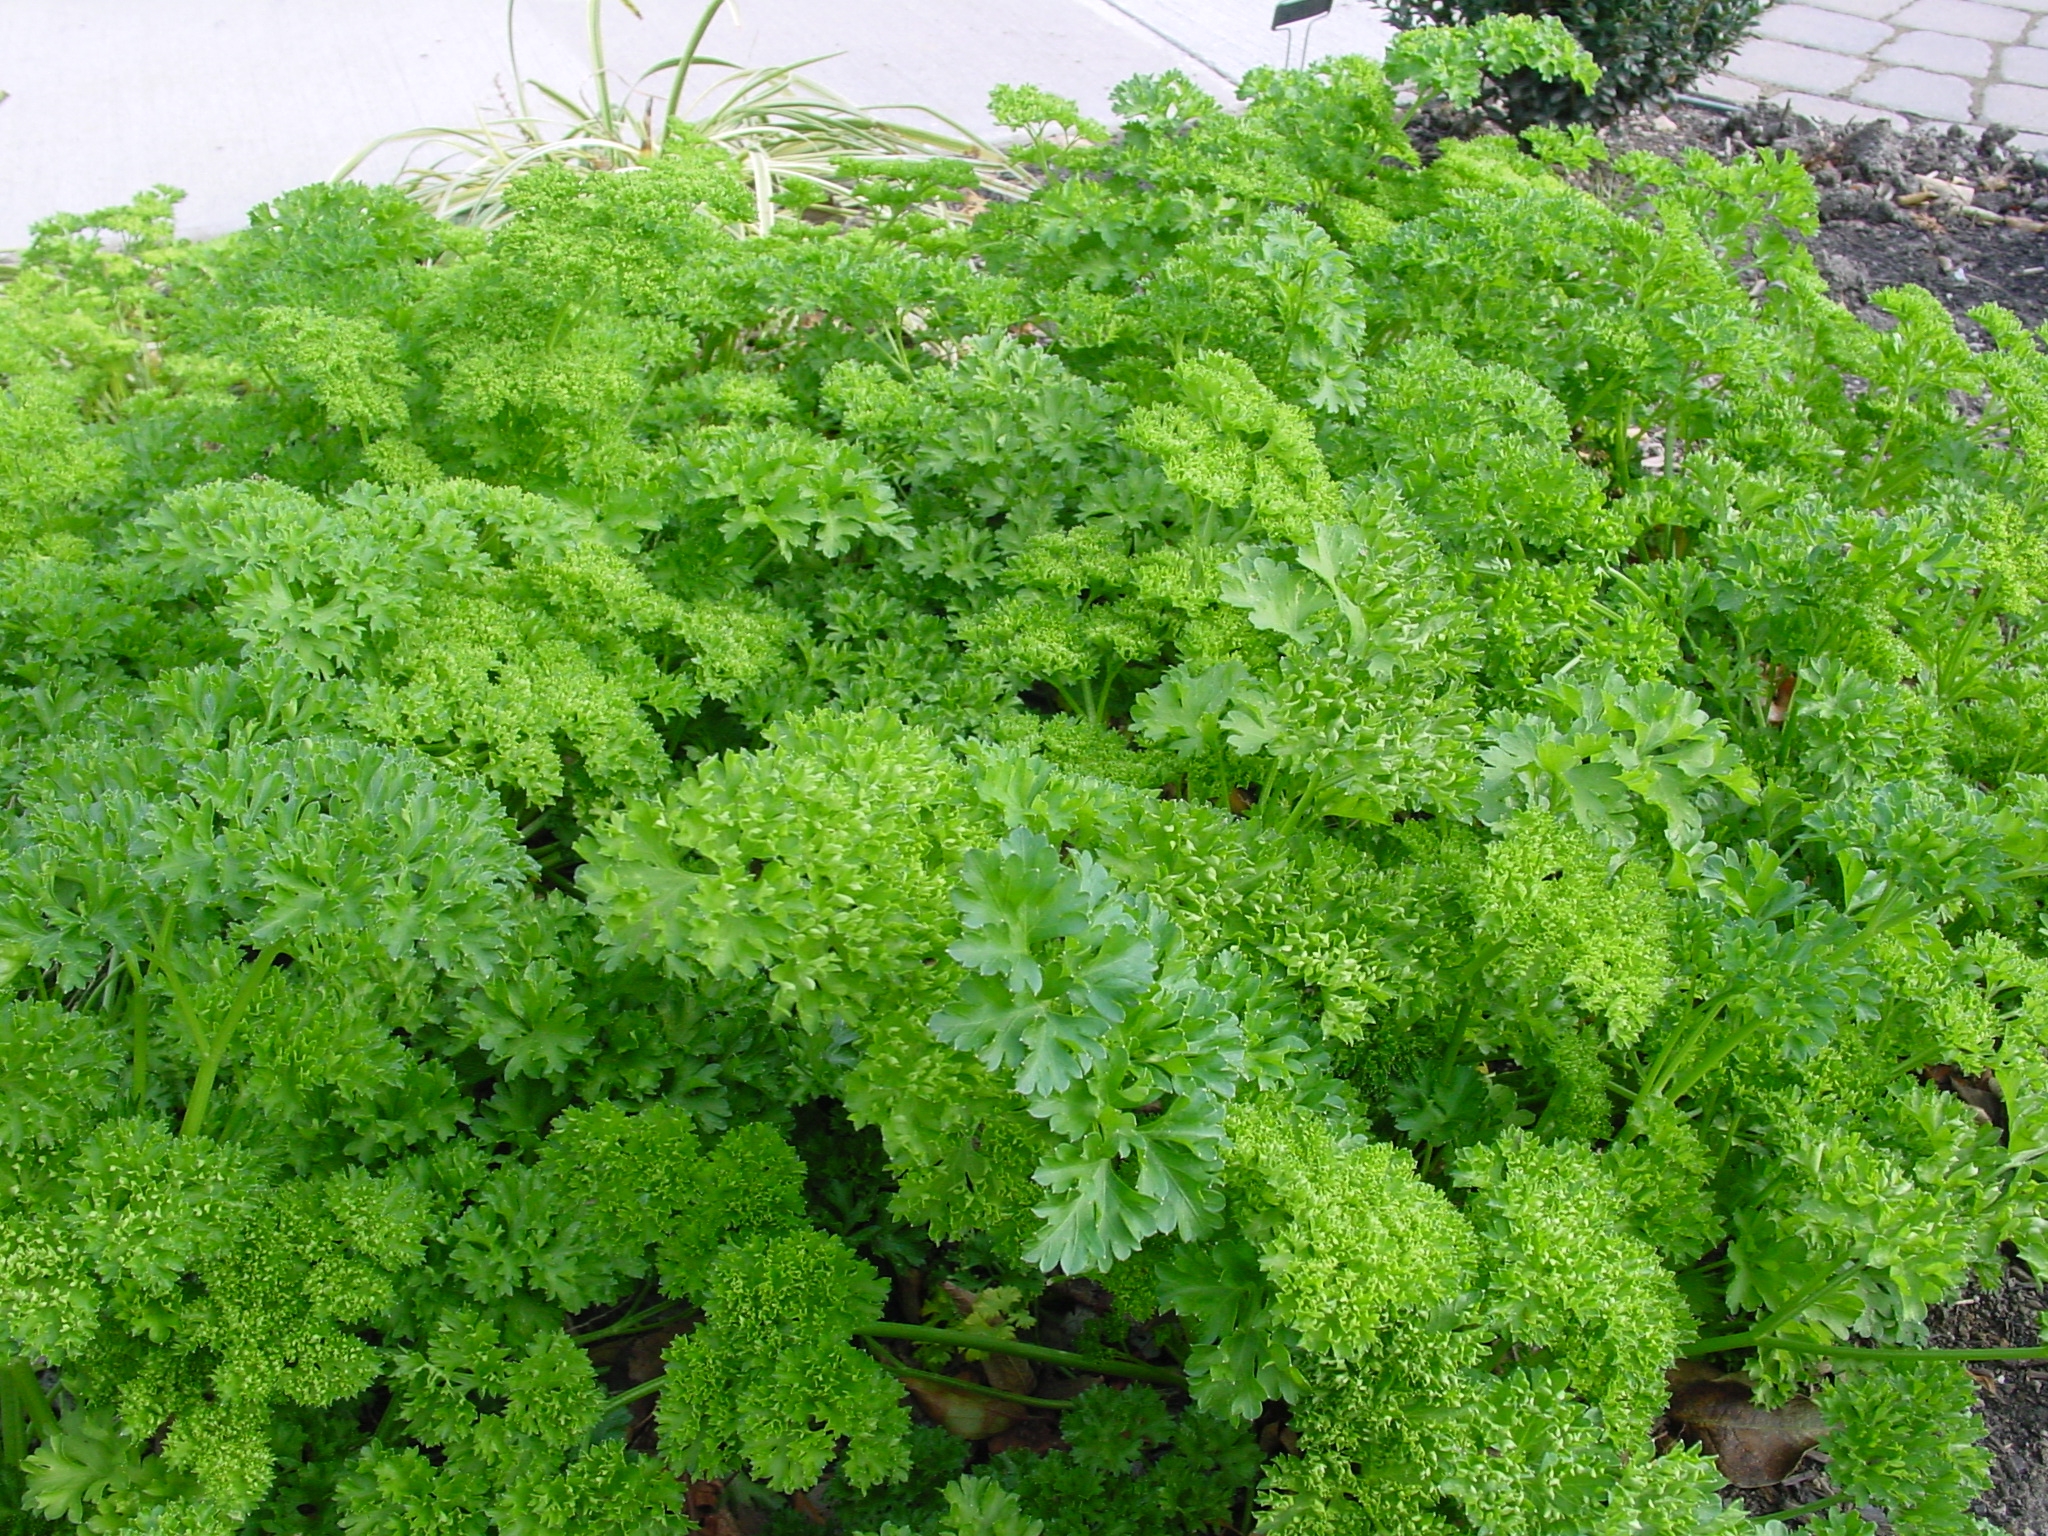 Curled parsley plants